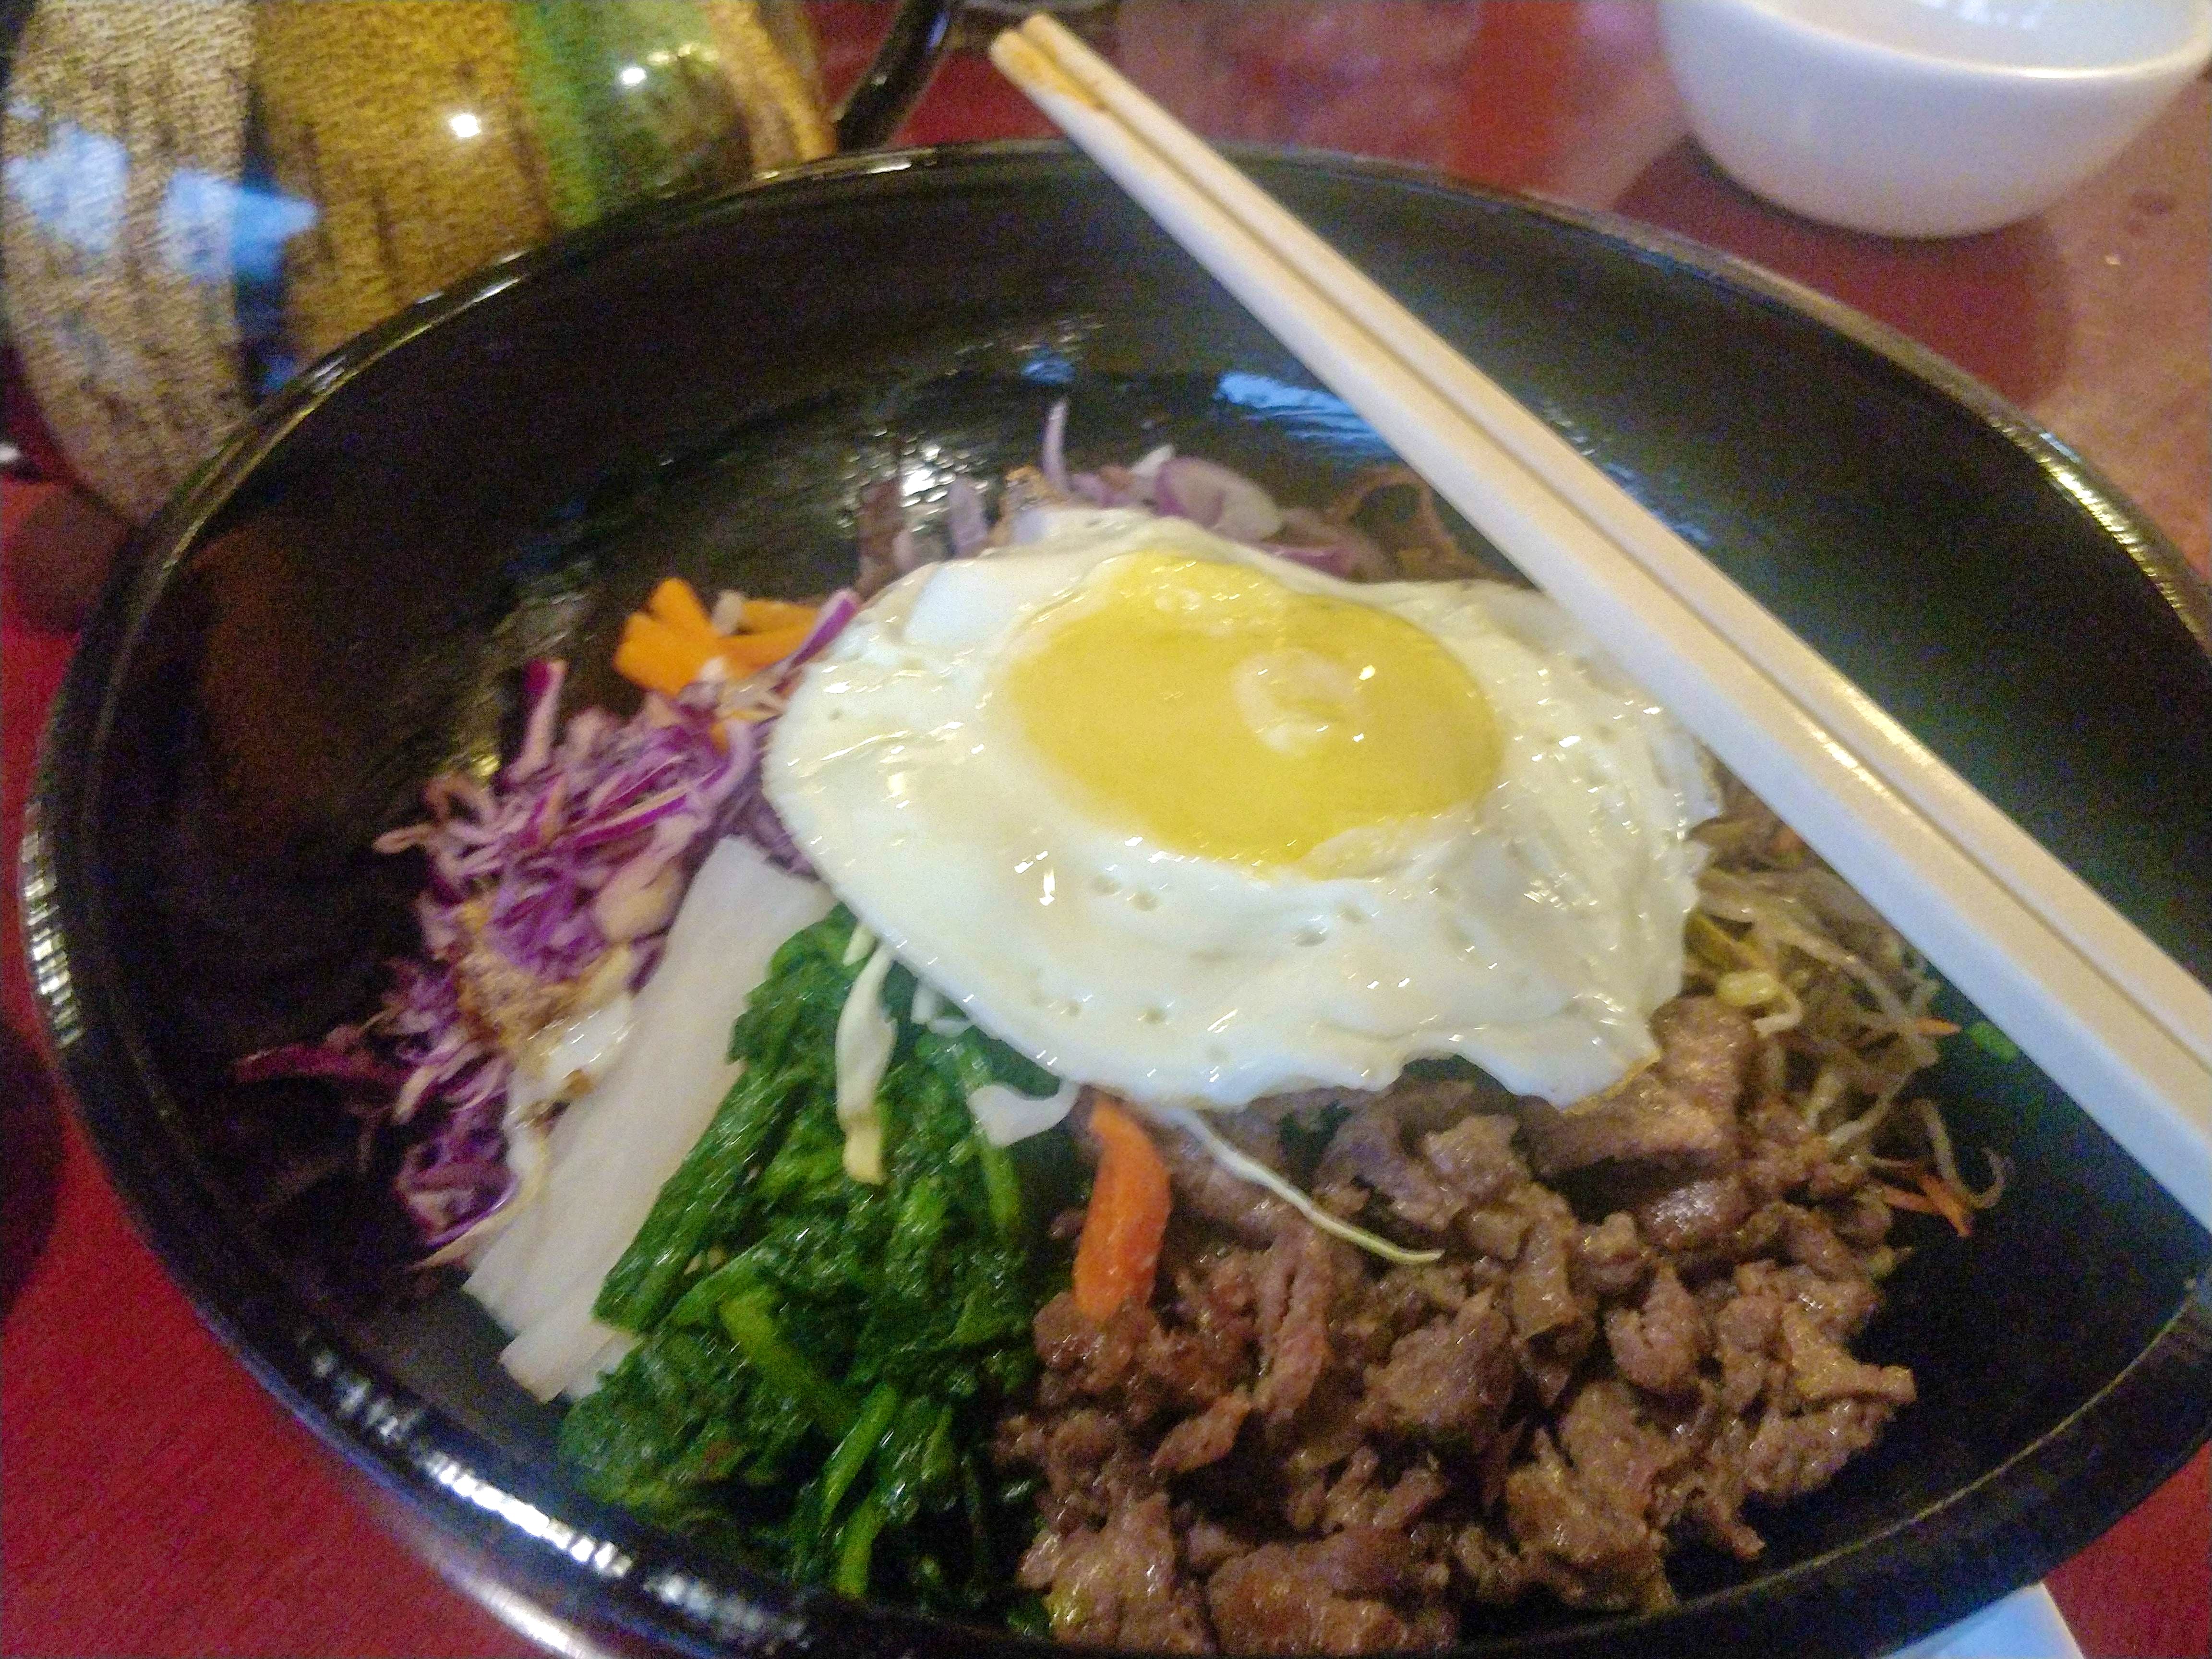 Dish,Food,Cuisine,Ingredient,Bibimbap,Steamed rice,Poached egg,Fried egg,Meat,Produce